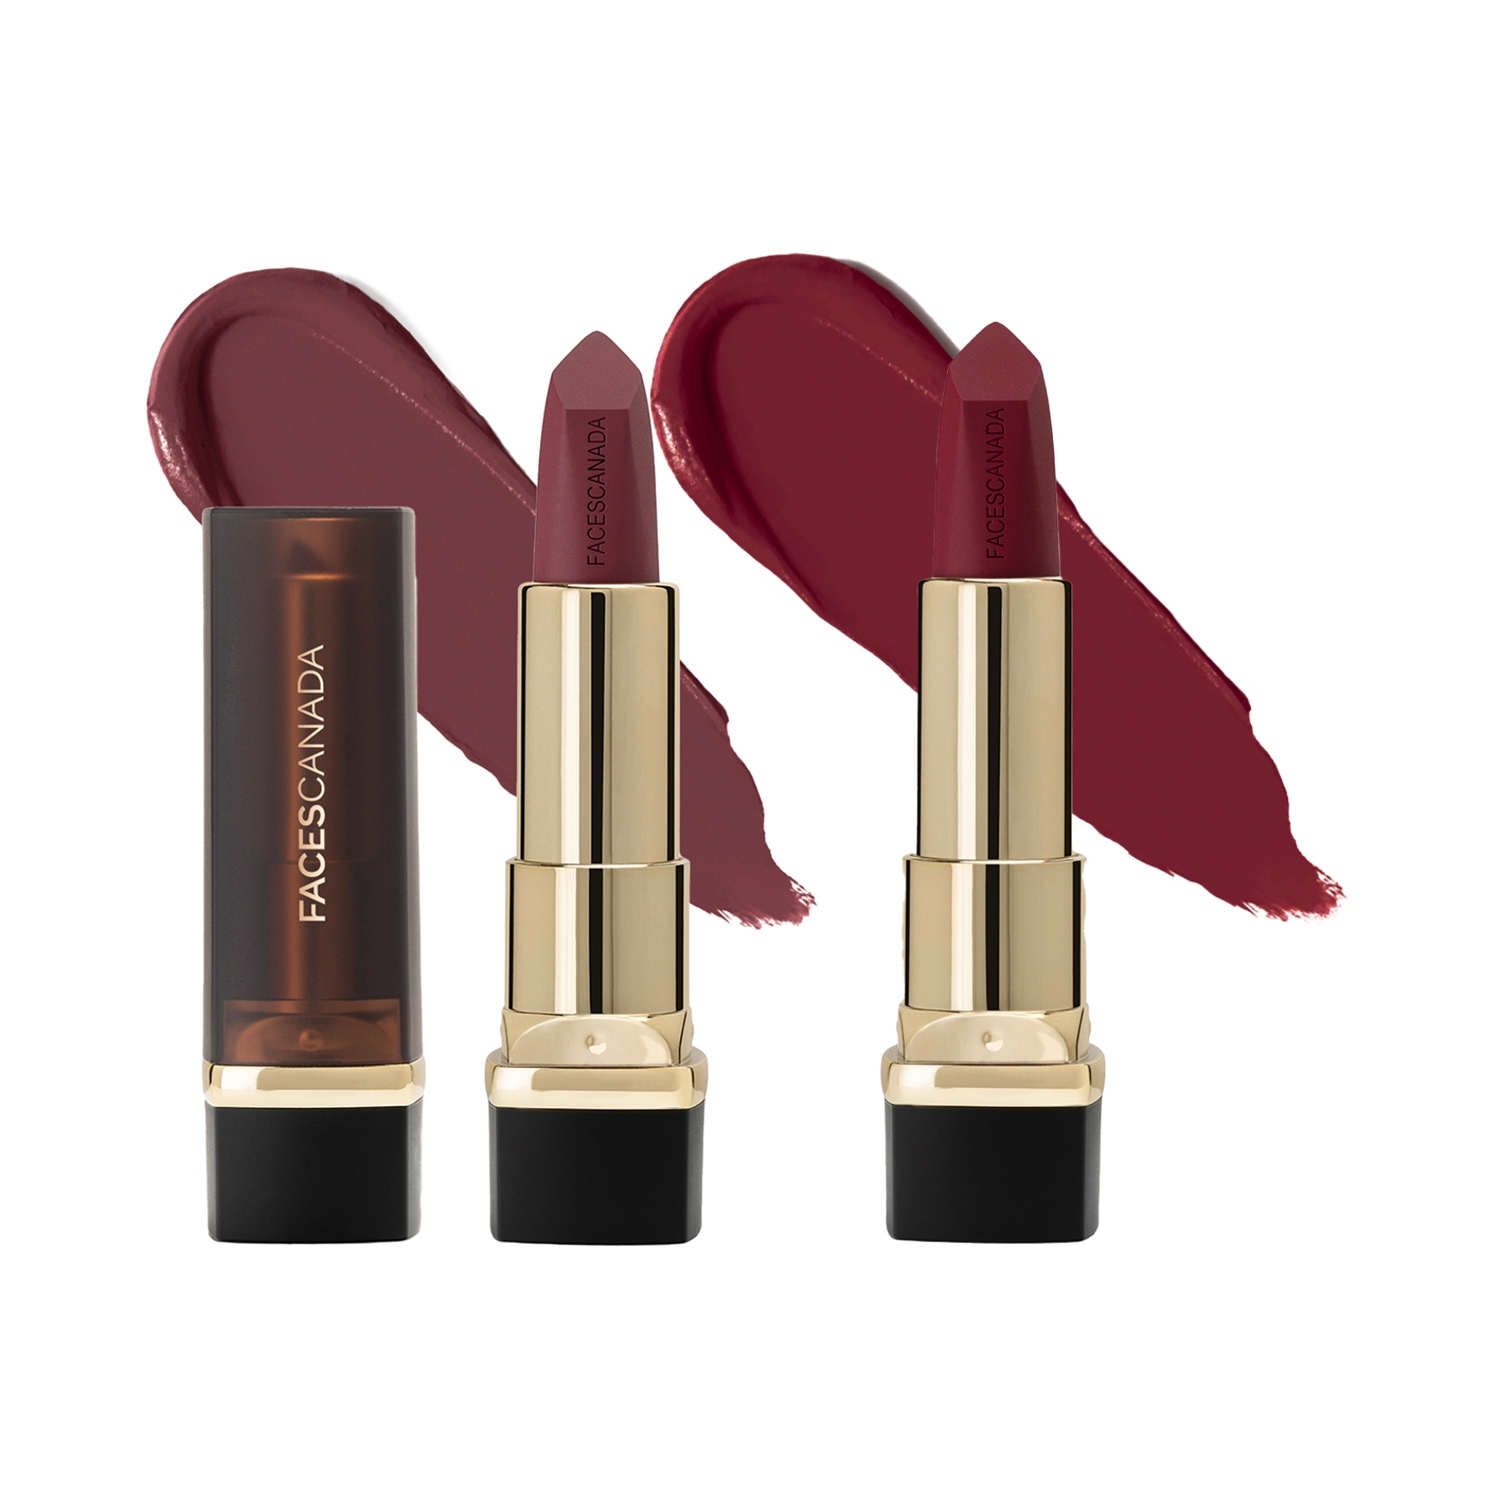 Faces Canada | Faces Canada Festive Hues Comfy Matte Creme Lipstick Combo Pack - Oh So Serious, Over And Out (2pcs)